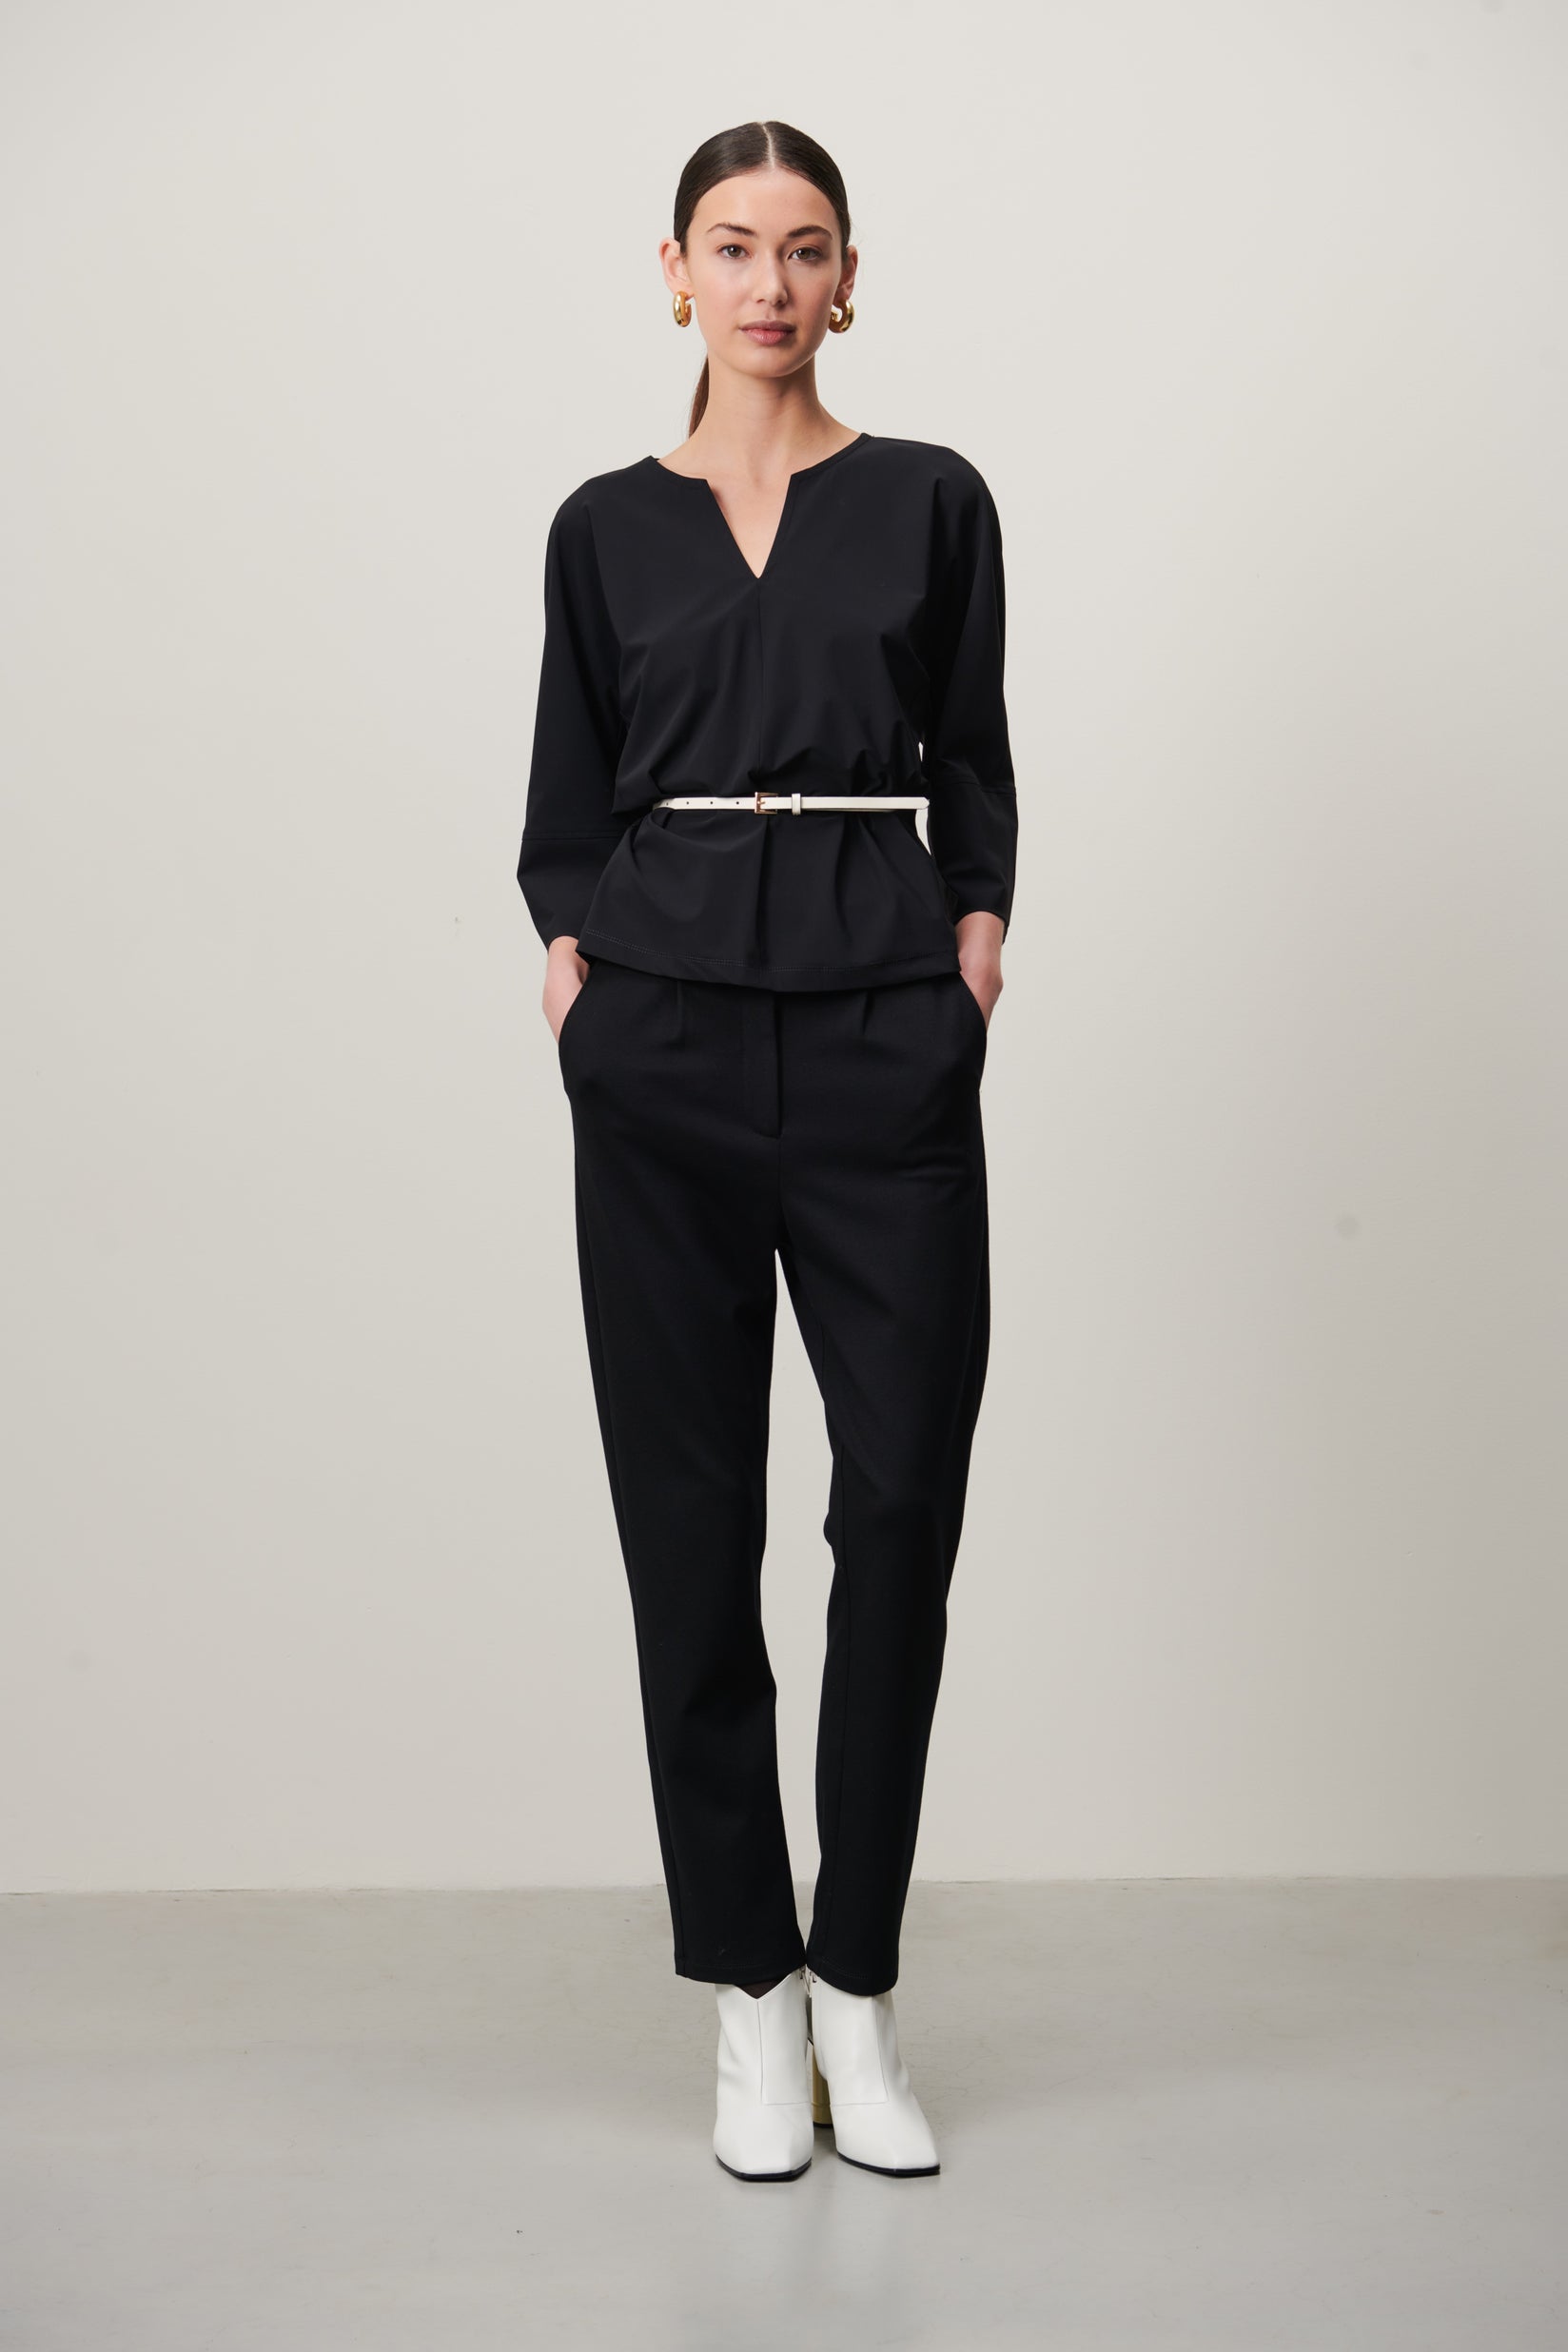 Stami Blouse Technical Jersey | Black